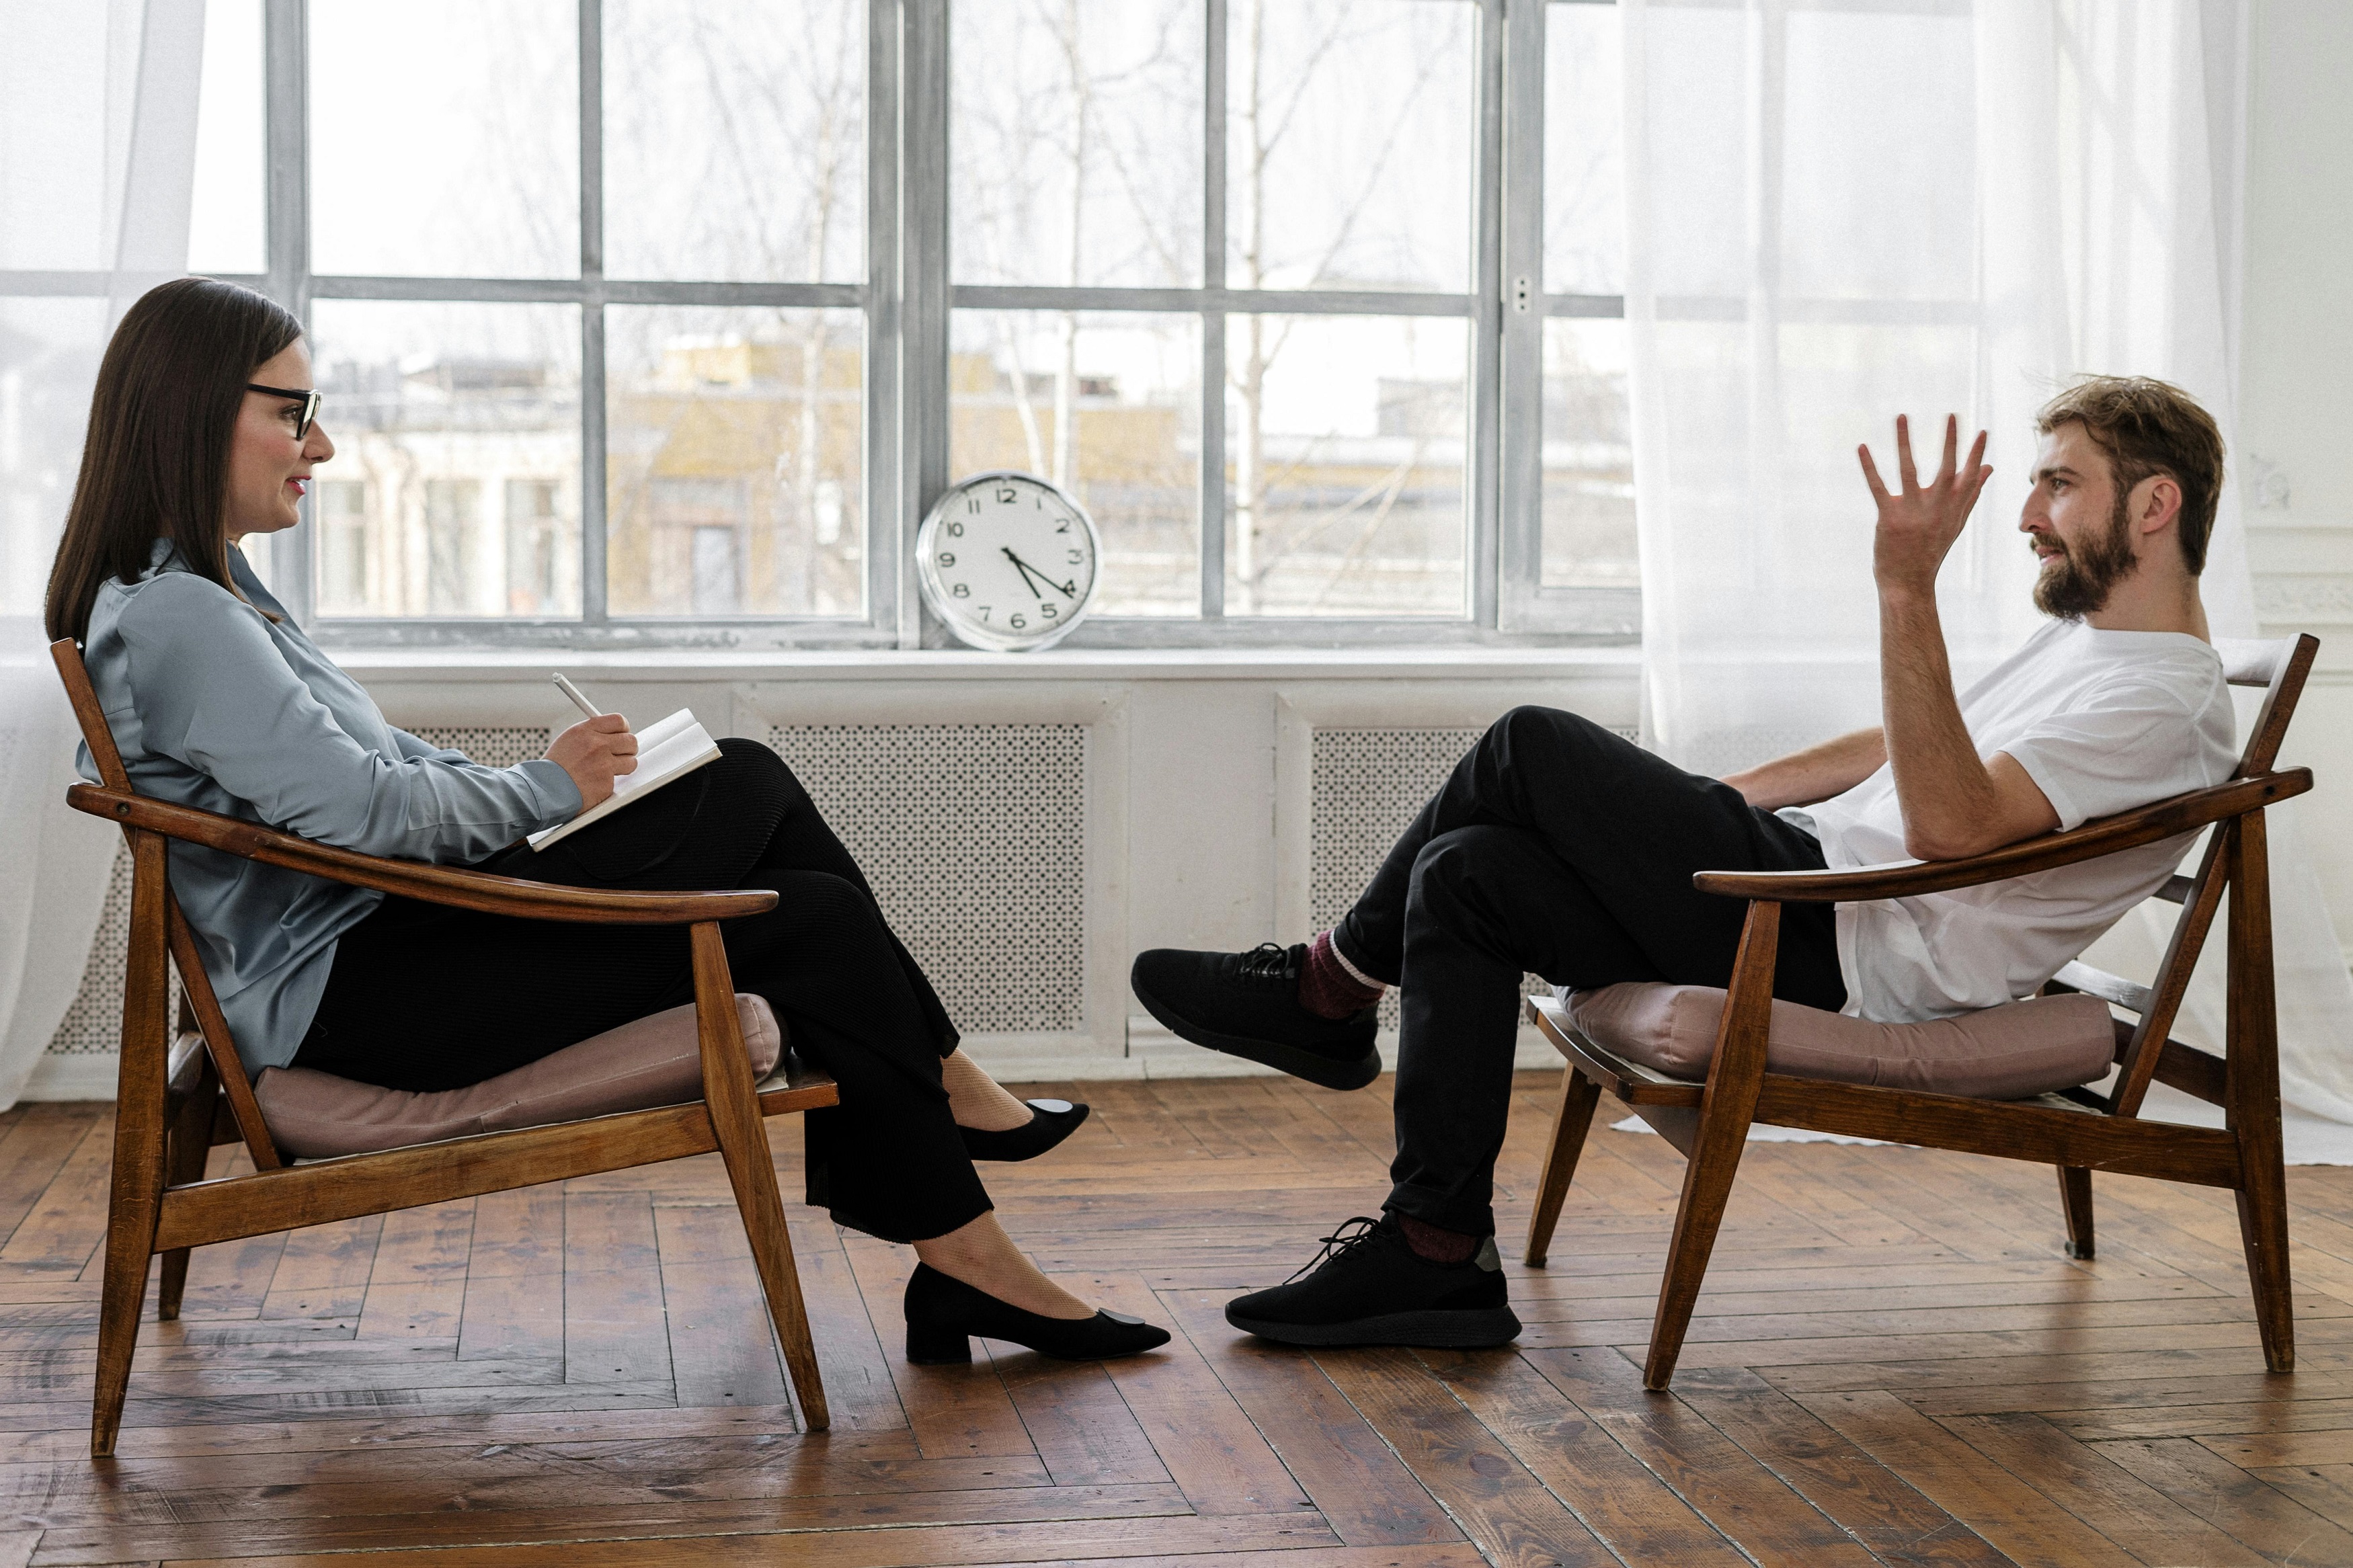 Two people sitting and facing each other in a counselling session.